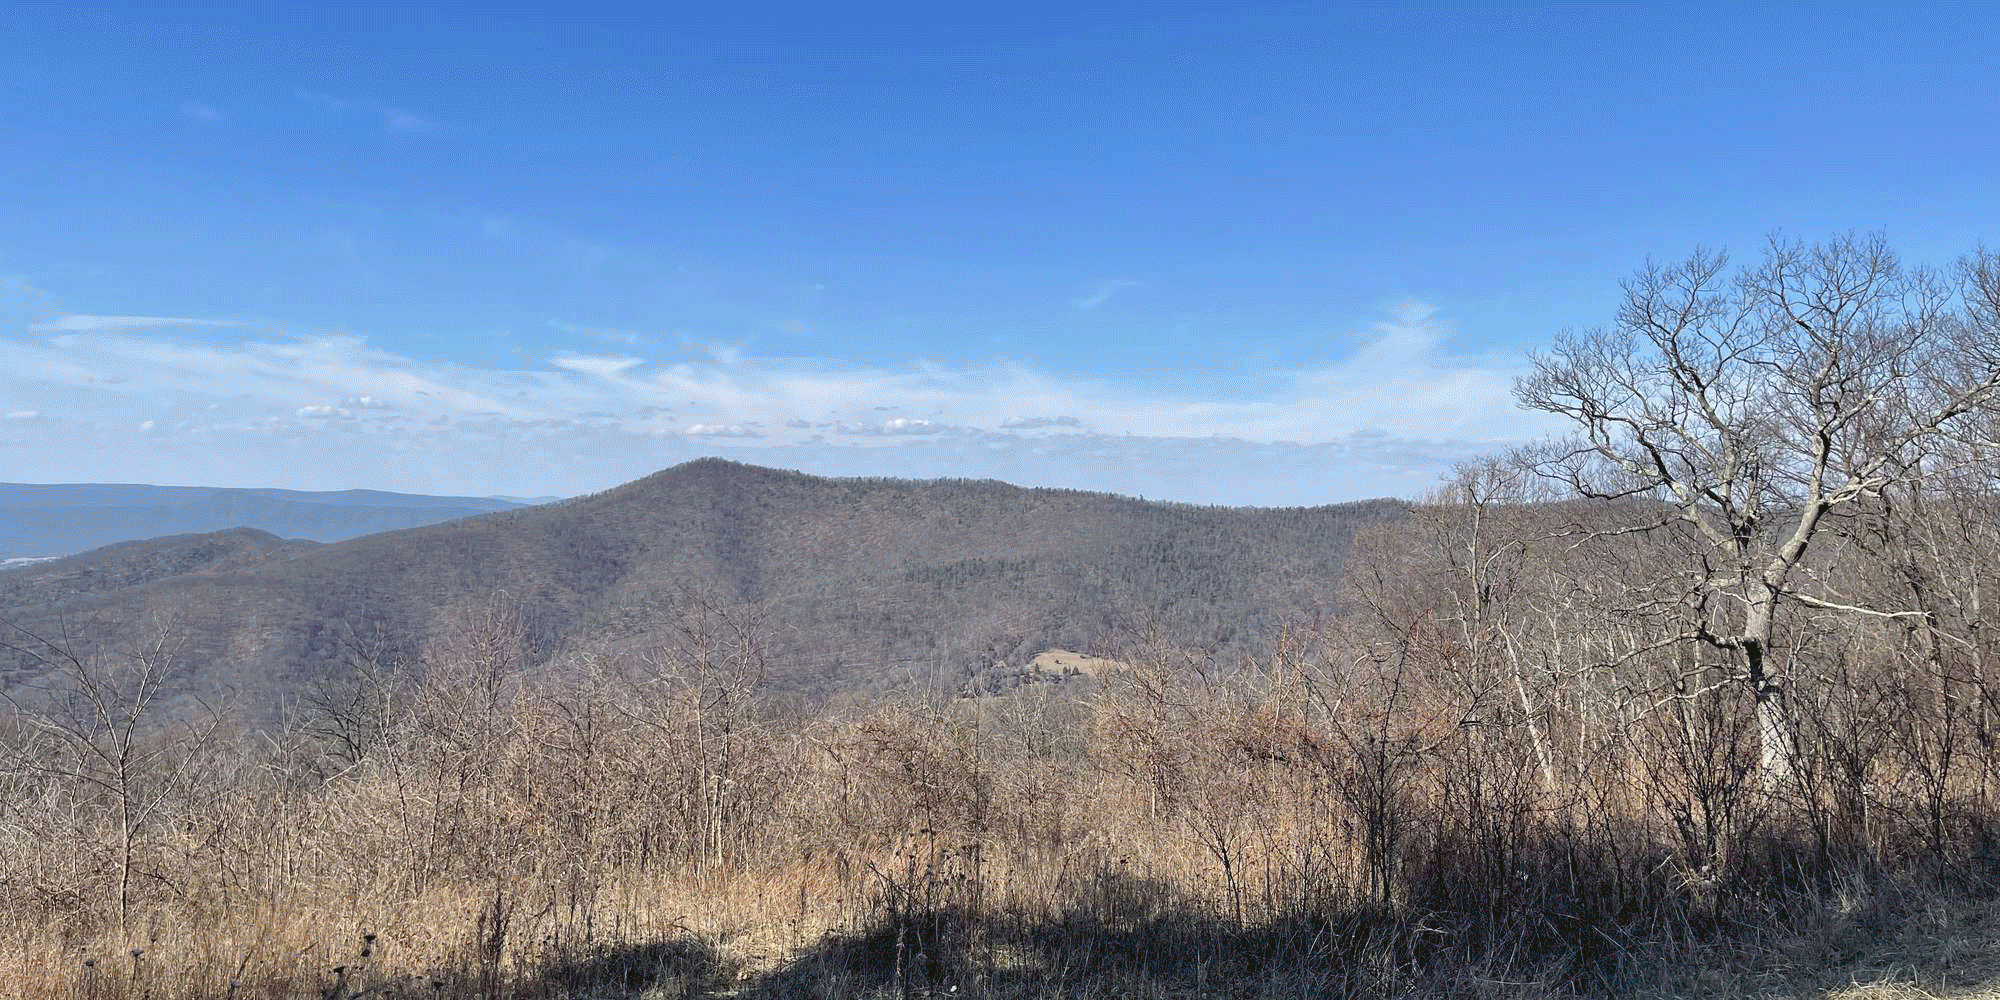 A timelapse of Pass Mountain Overlook, mile 30.1 of Skyline Drive, through the seasons.